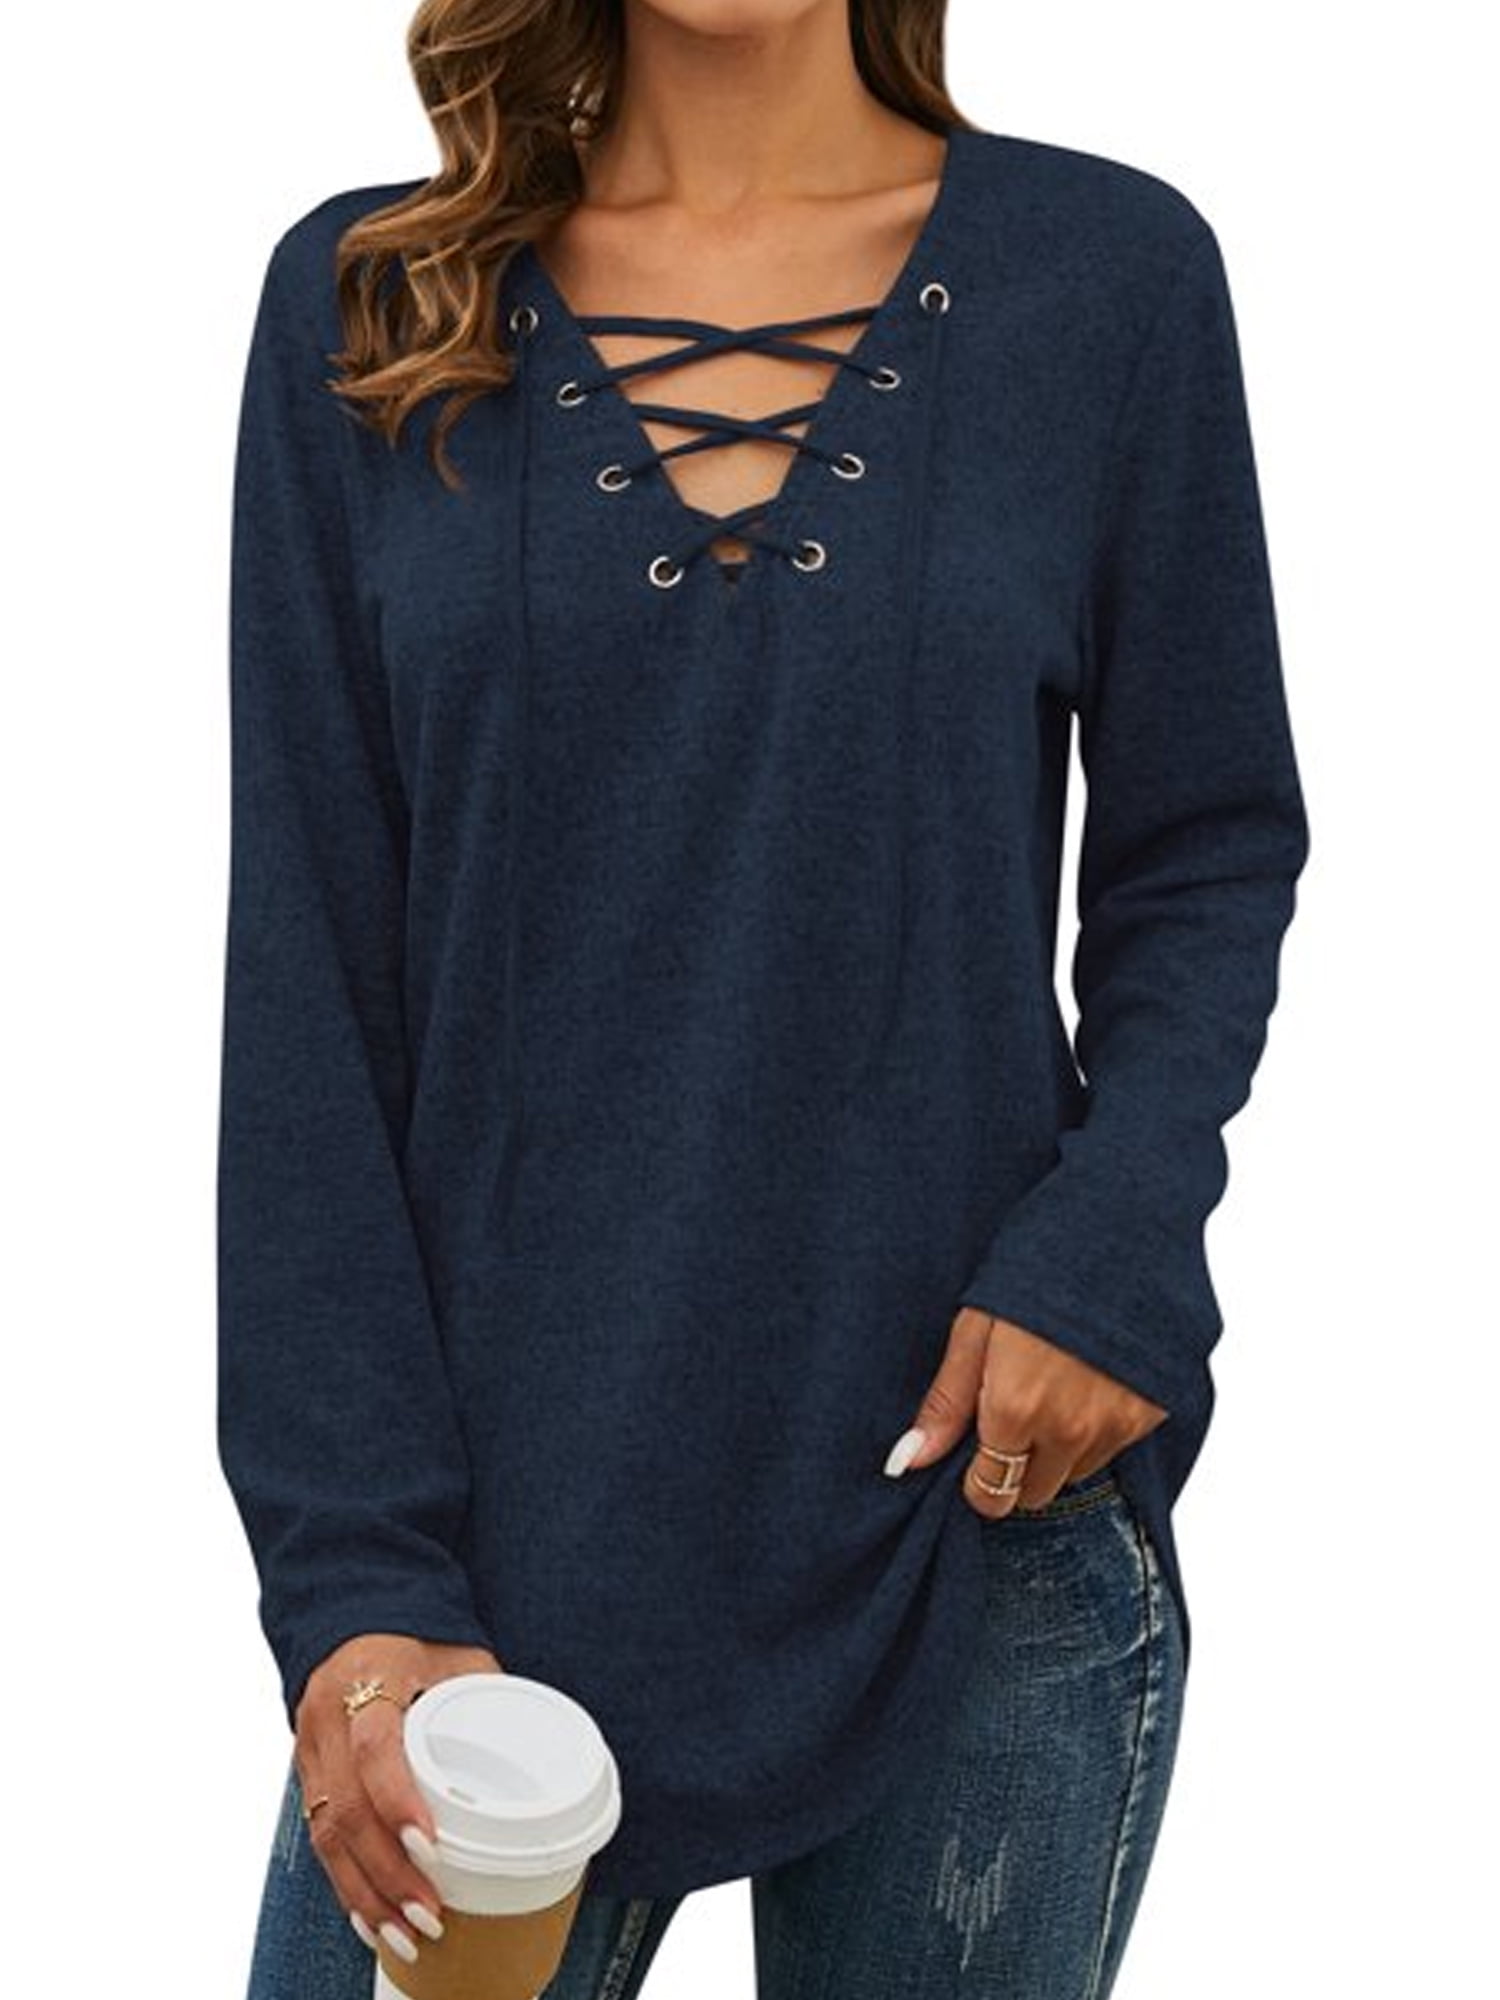 Womens Lace V-neck Long Sleeve Blouse Pullover Ladies Casual T-shirt Tops Tunic